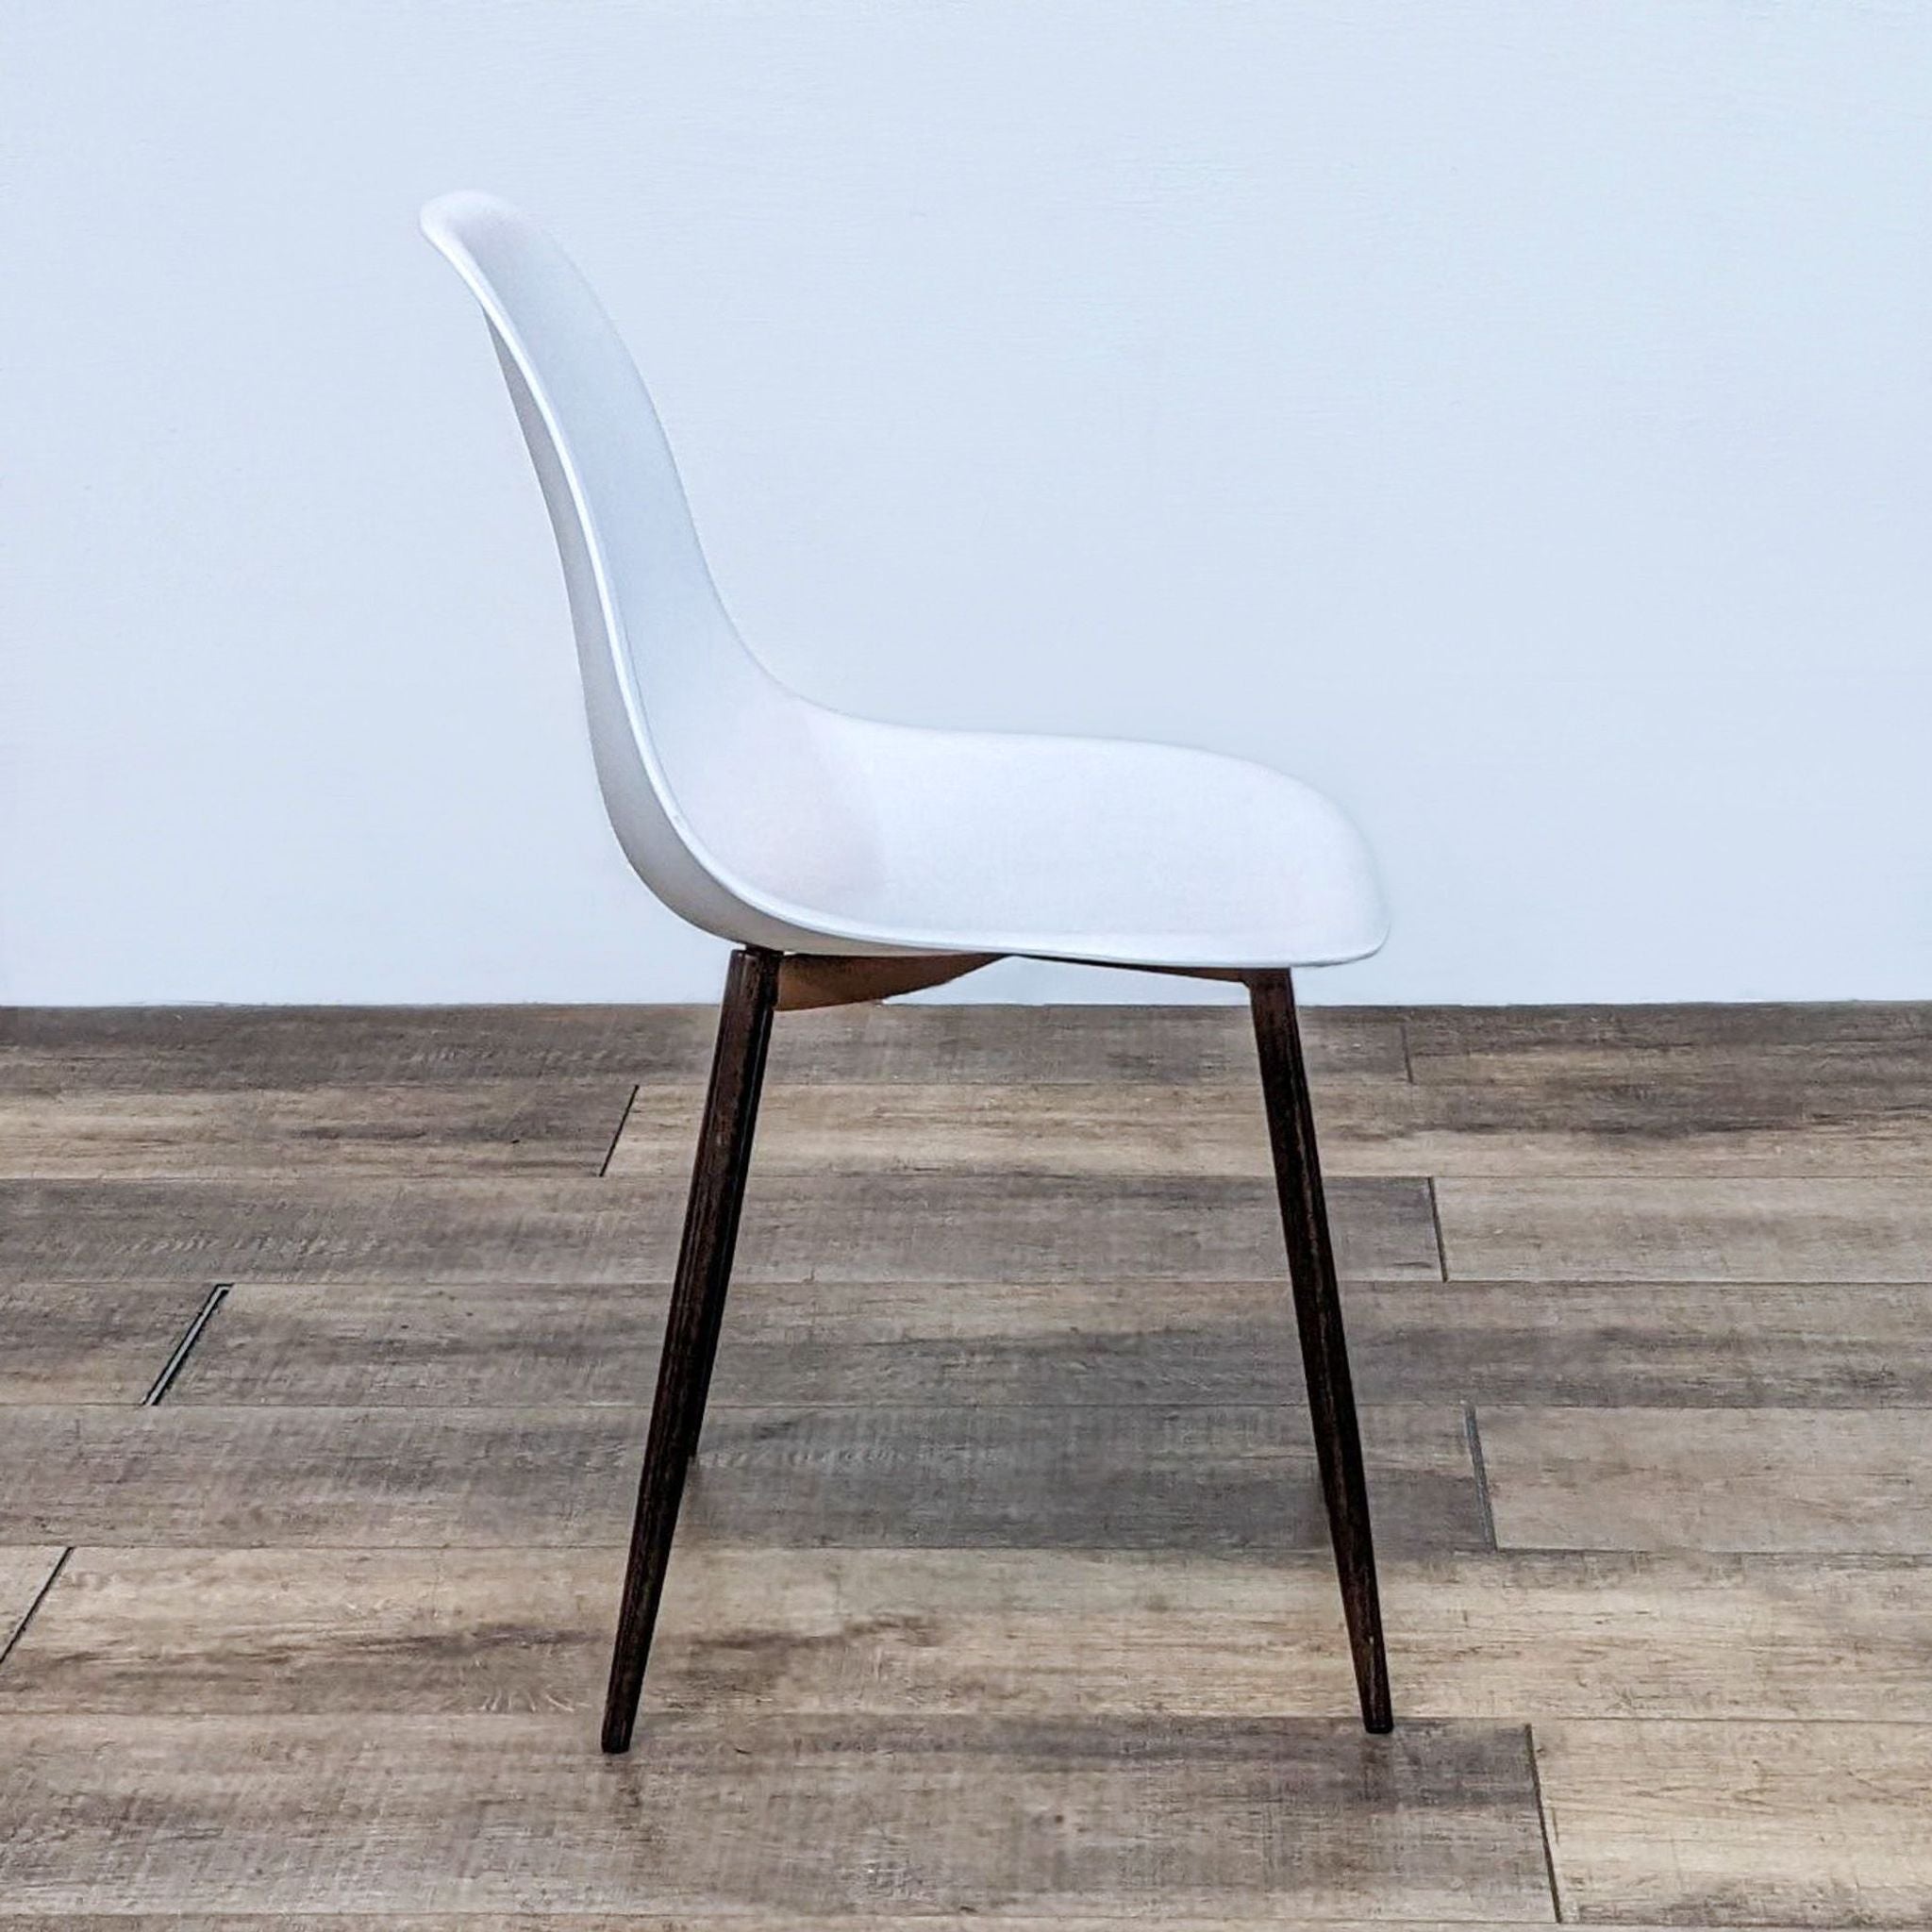 Alt text 2: Close-up of the Reperch modern dining chair's seat attachment to walnut-look metal legs.